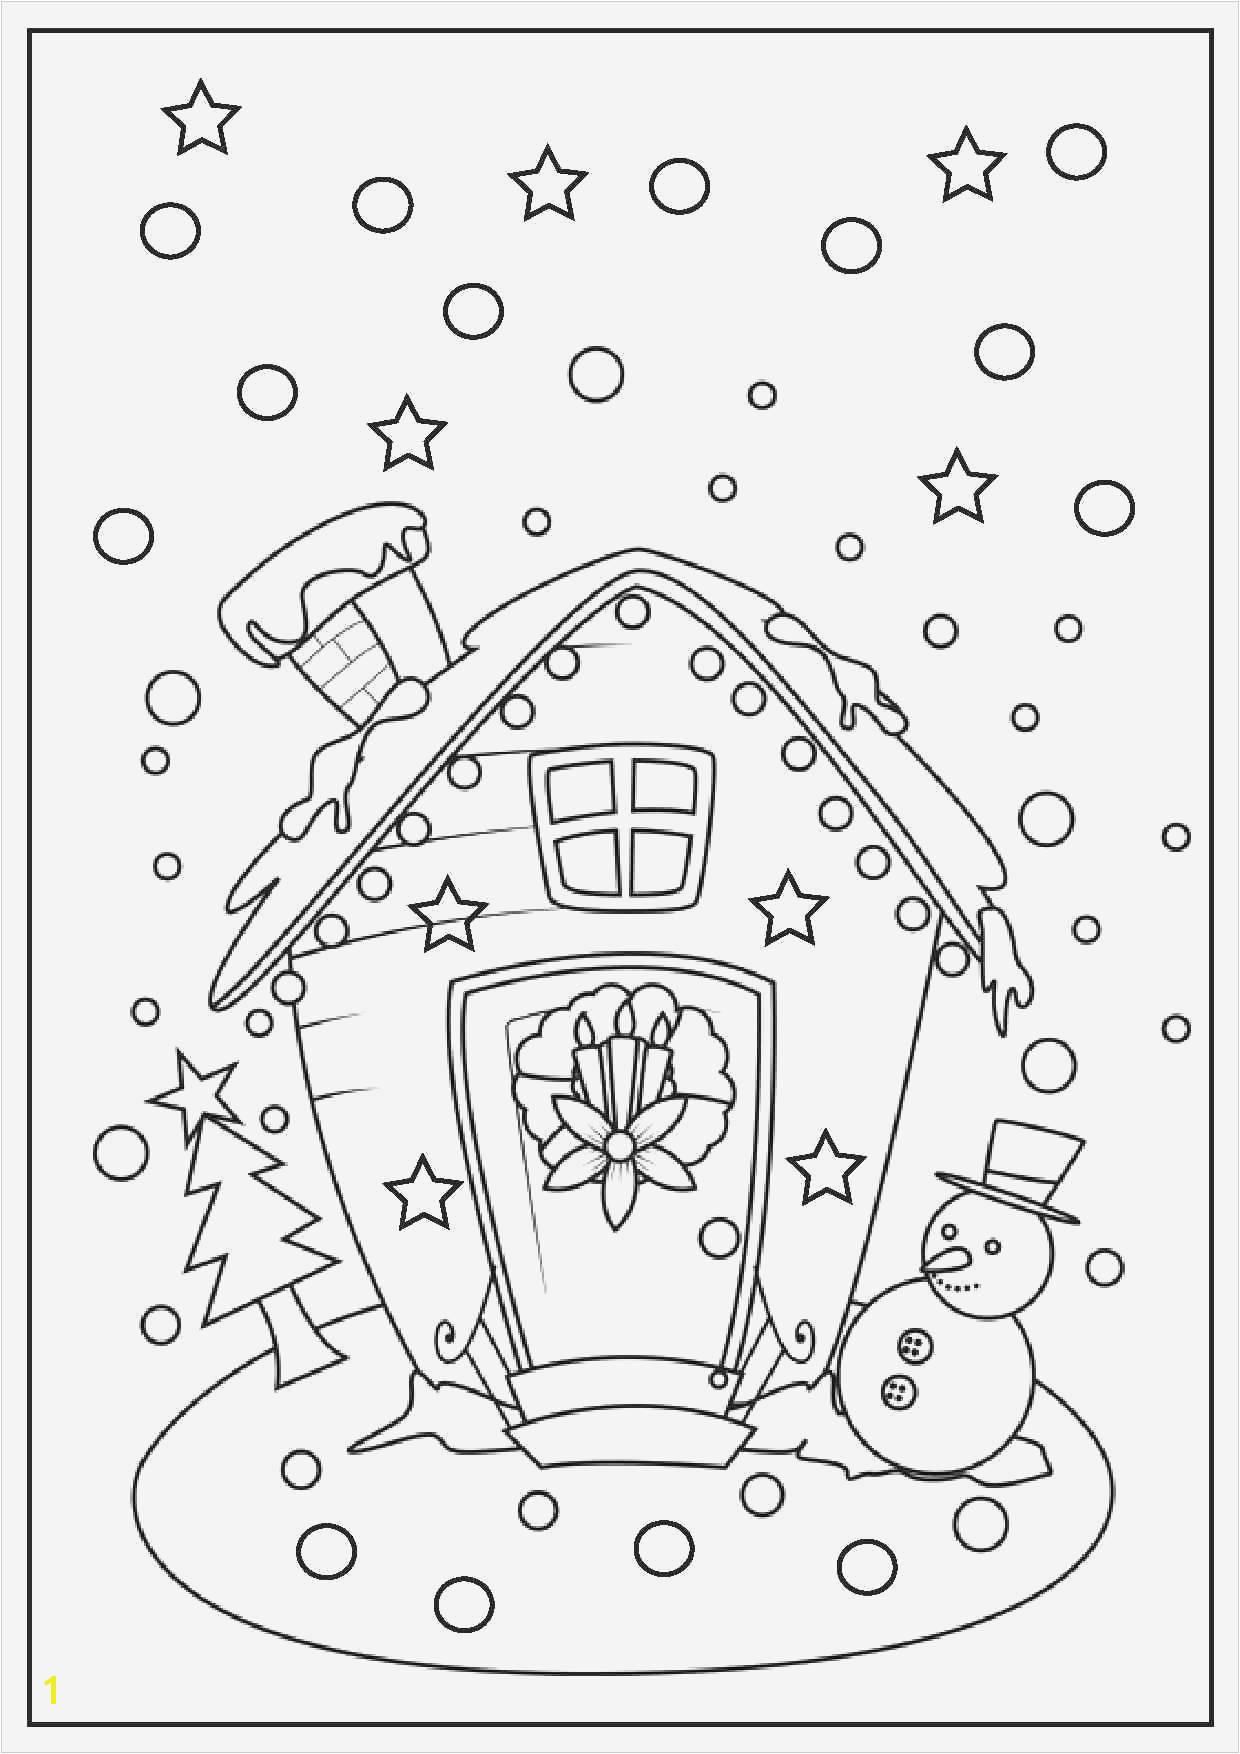 Home Coloring Pages Best Color Sheet 0d Modokom Fun Time 48